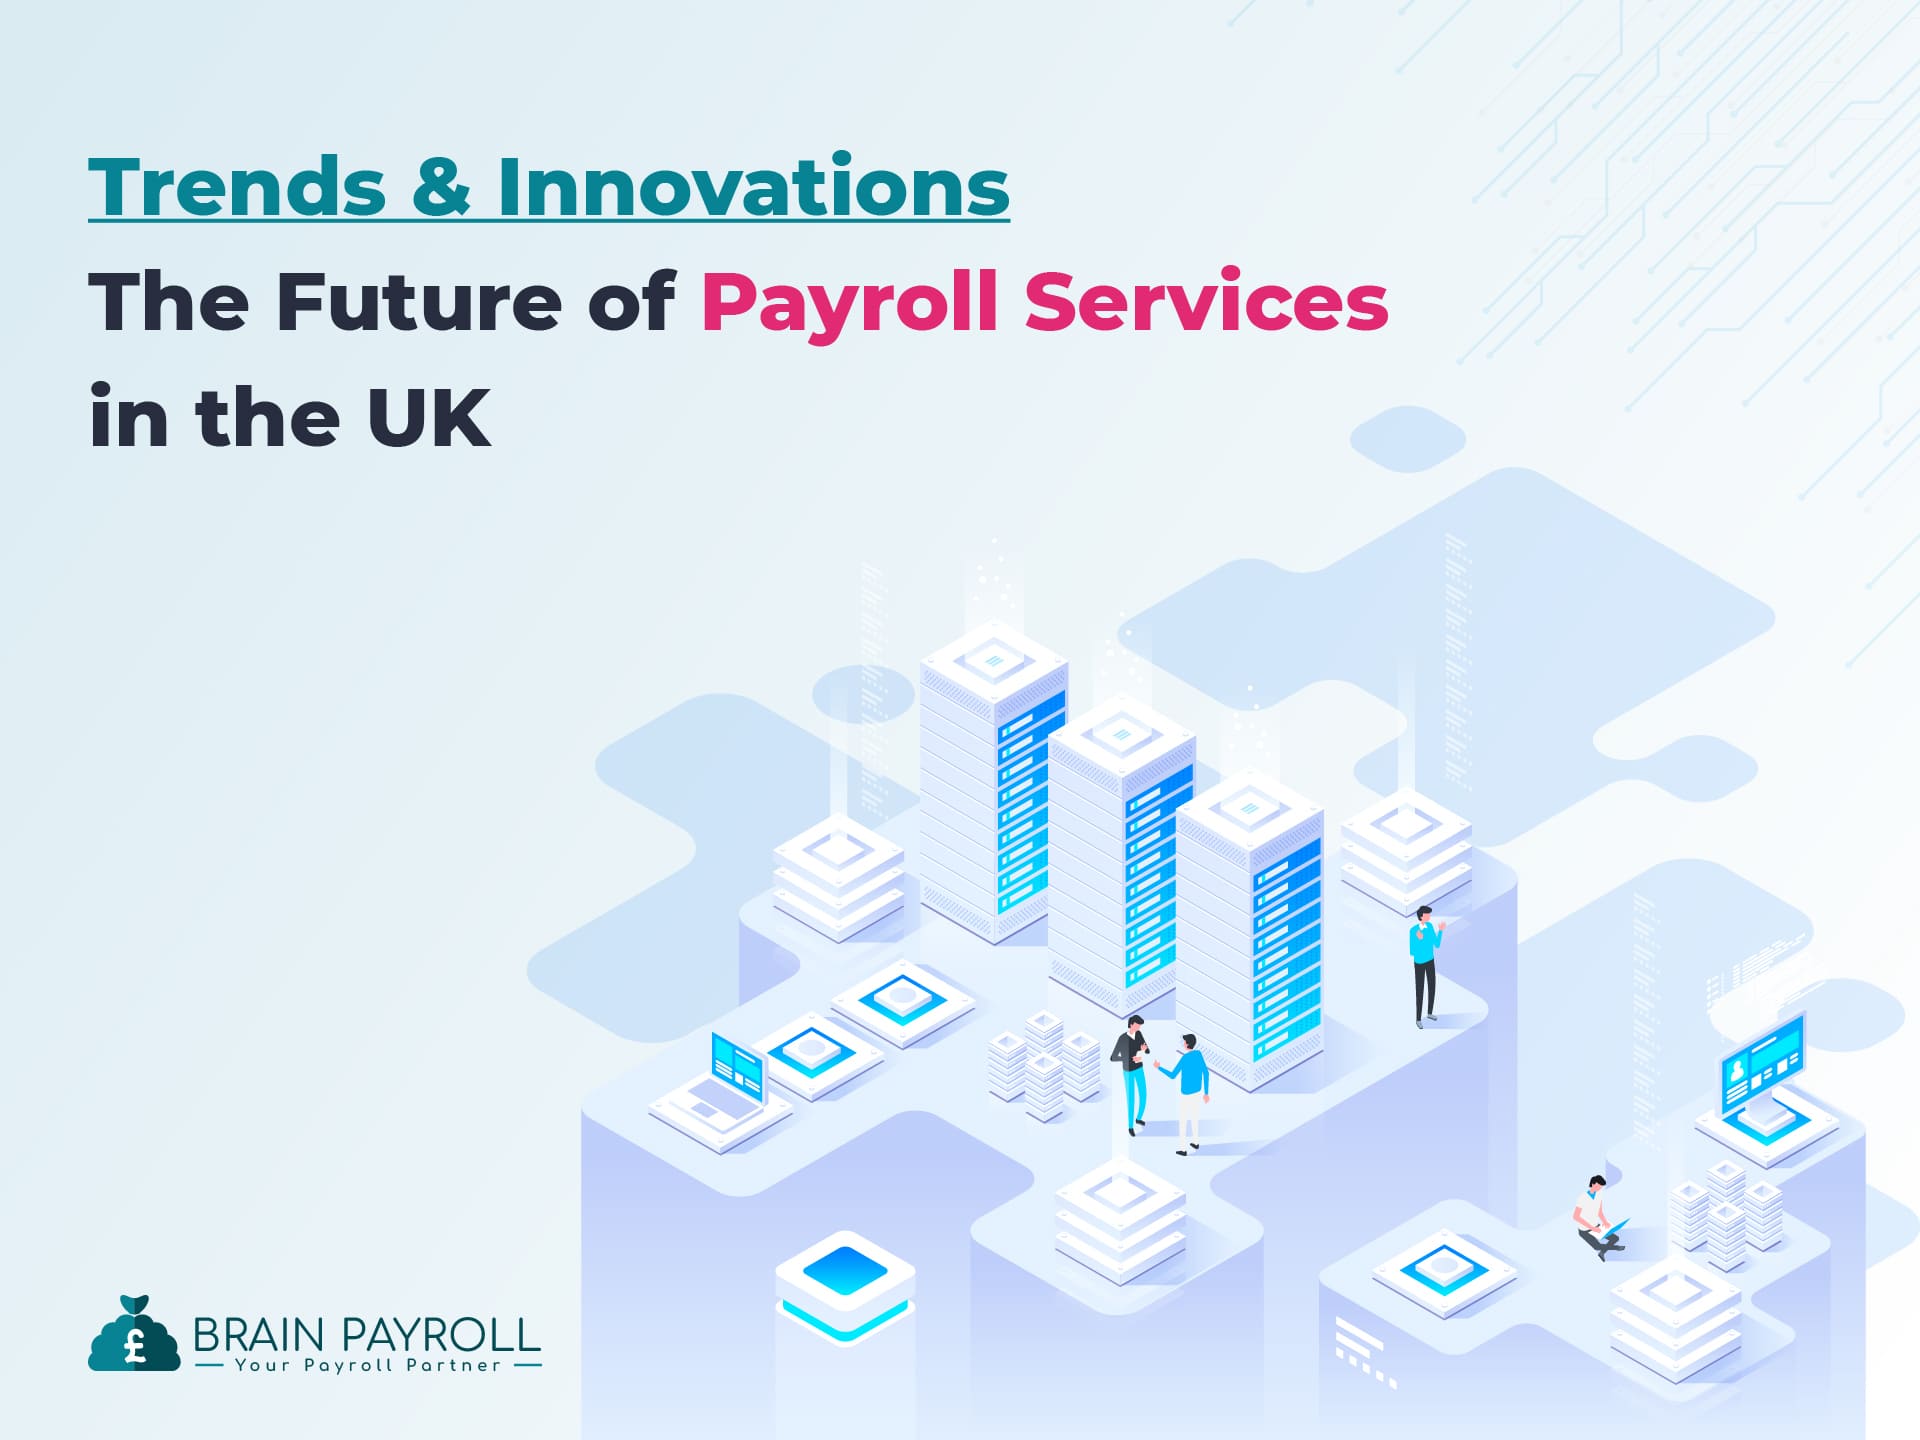 The Future of Payroll Services in the UK: Trends and Innovations